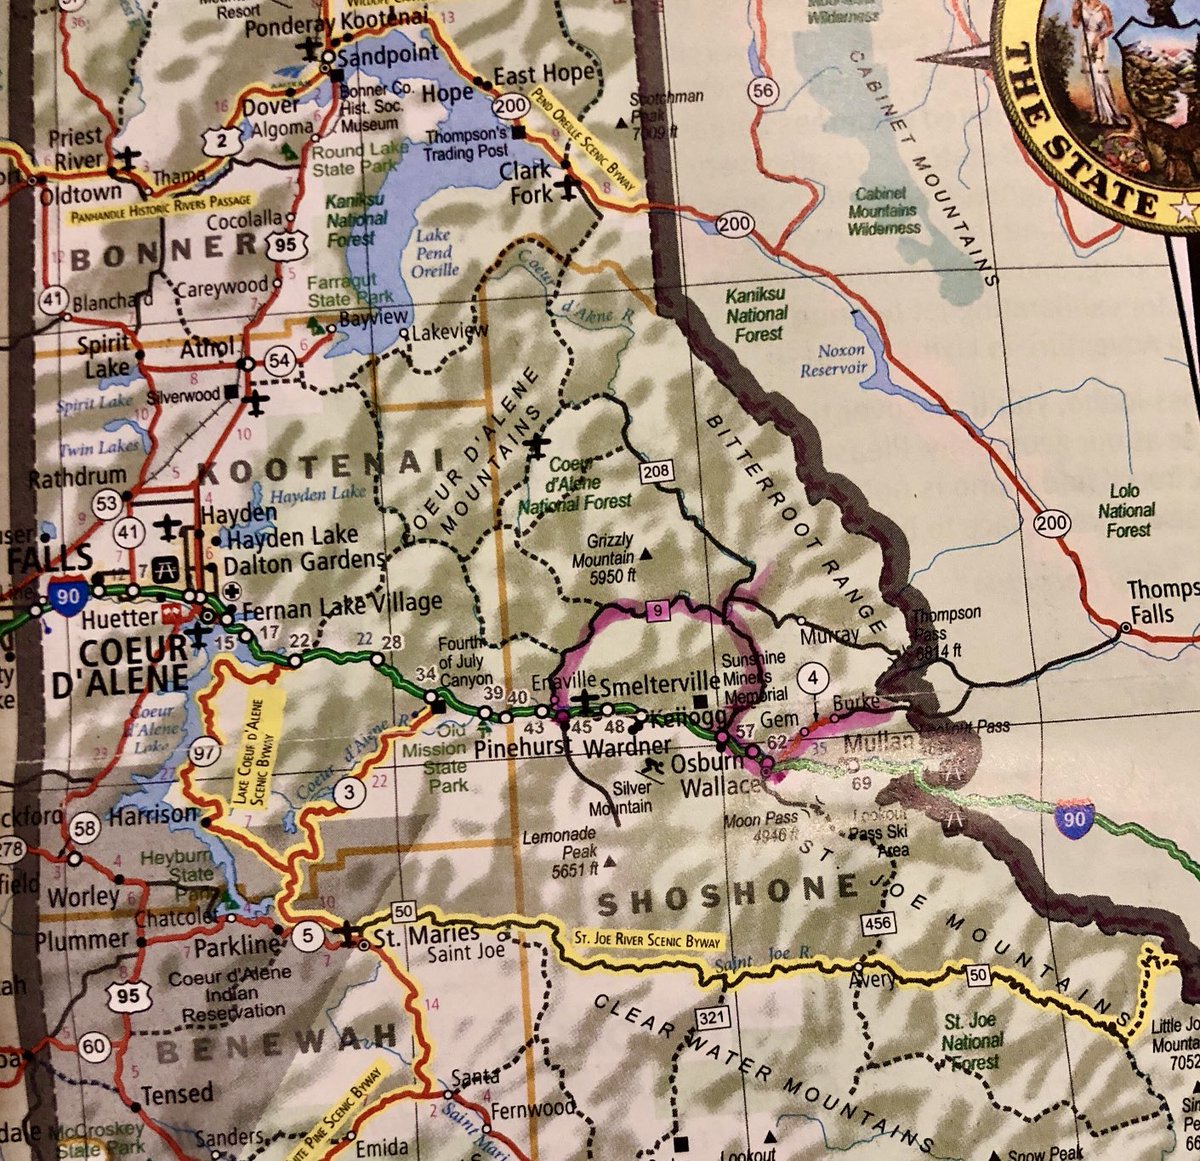 This is where we went roadtripping yesterday. We began at Wallace, ID, found the road (4) snowed in just past Burke, then took (9) to Enaville. There were quite a few white tailed deer & elk. Perfect moose habitat, but we didn’t see any. It is a well established camping area.